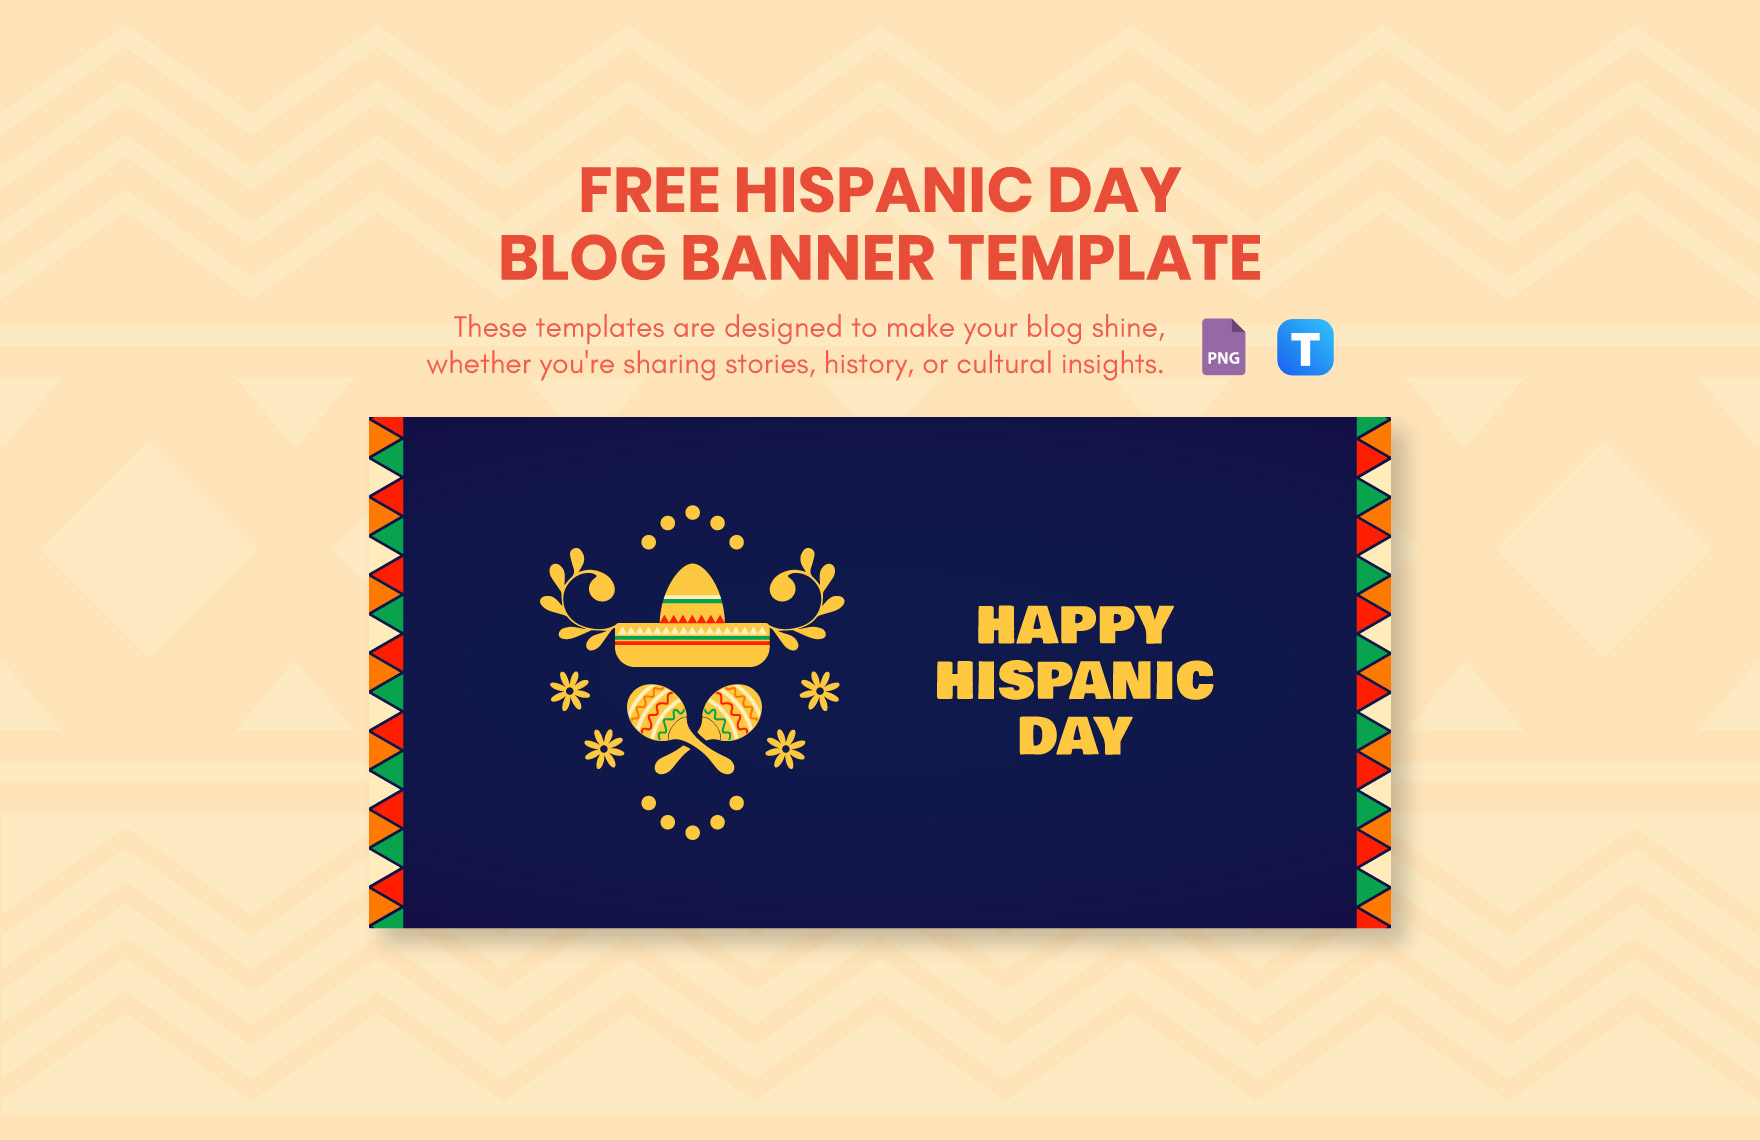 Free Hispanic Day Blog Banner Template in PNG